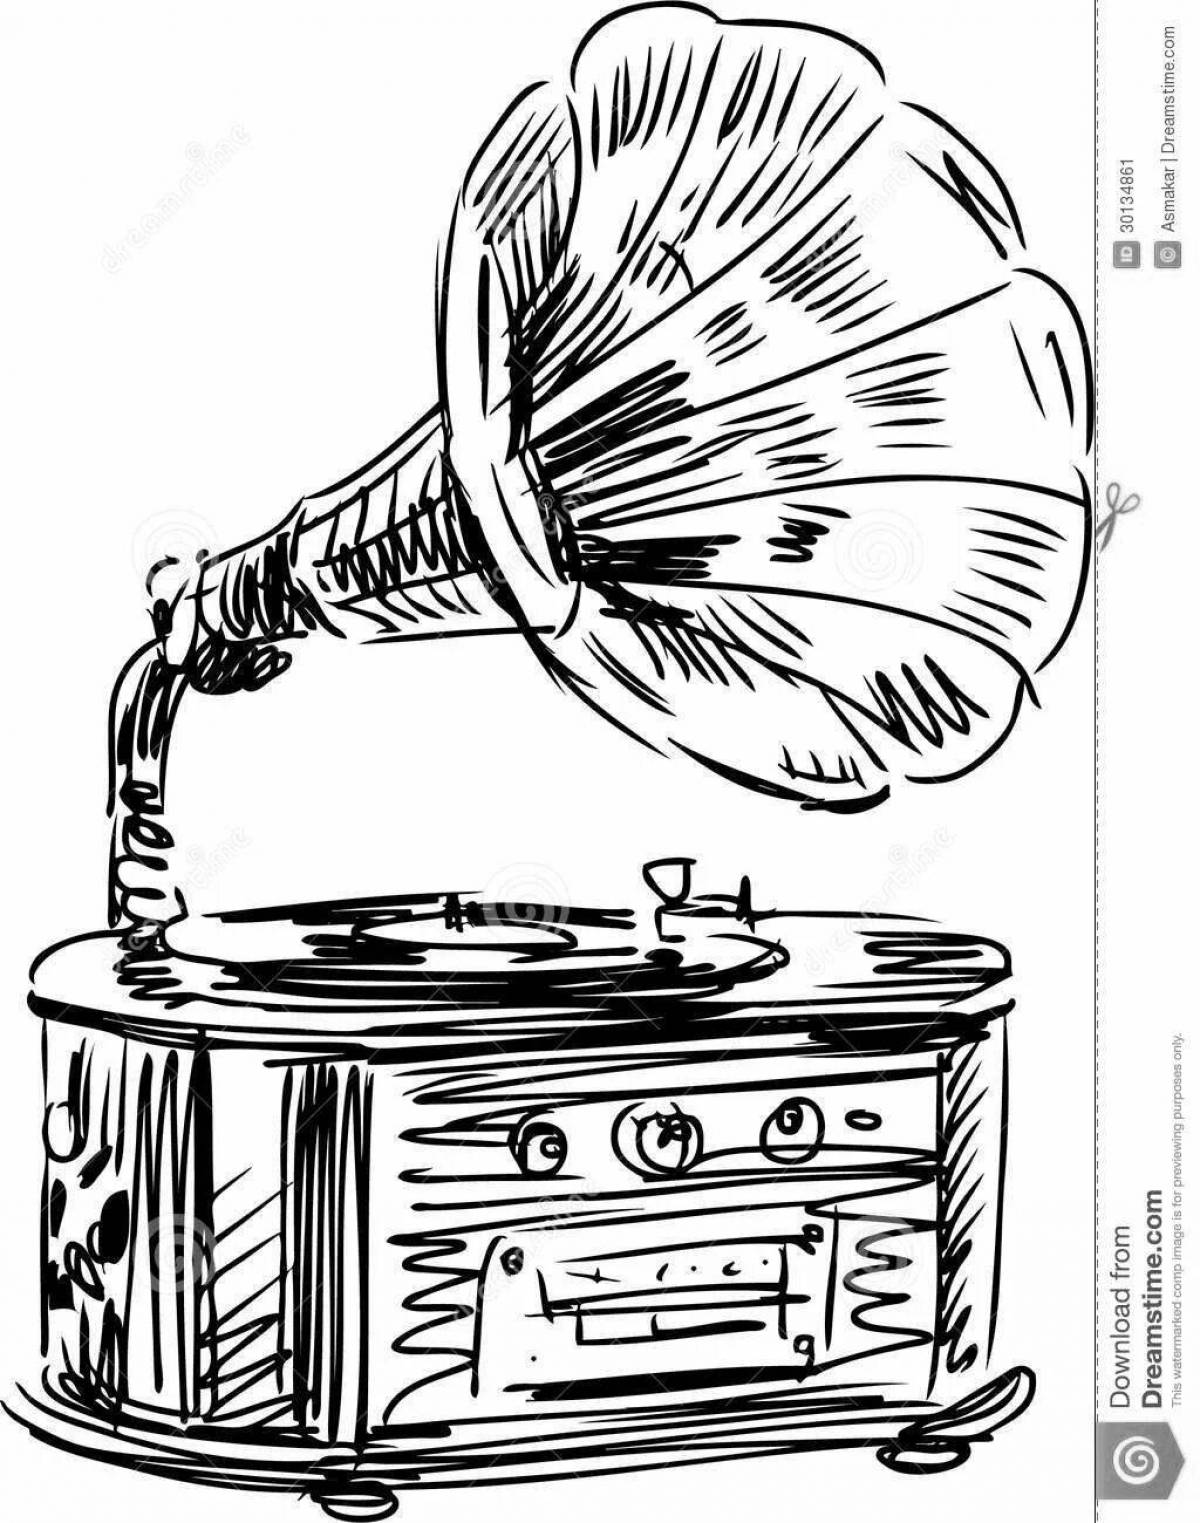 Coloring page dramatic gramophone